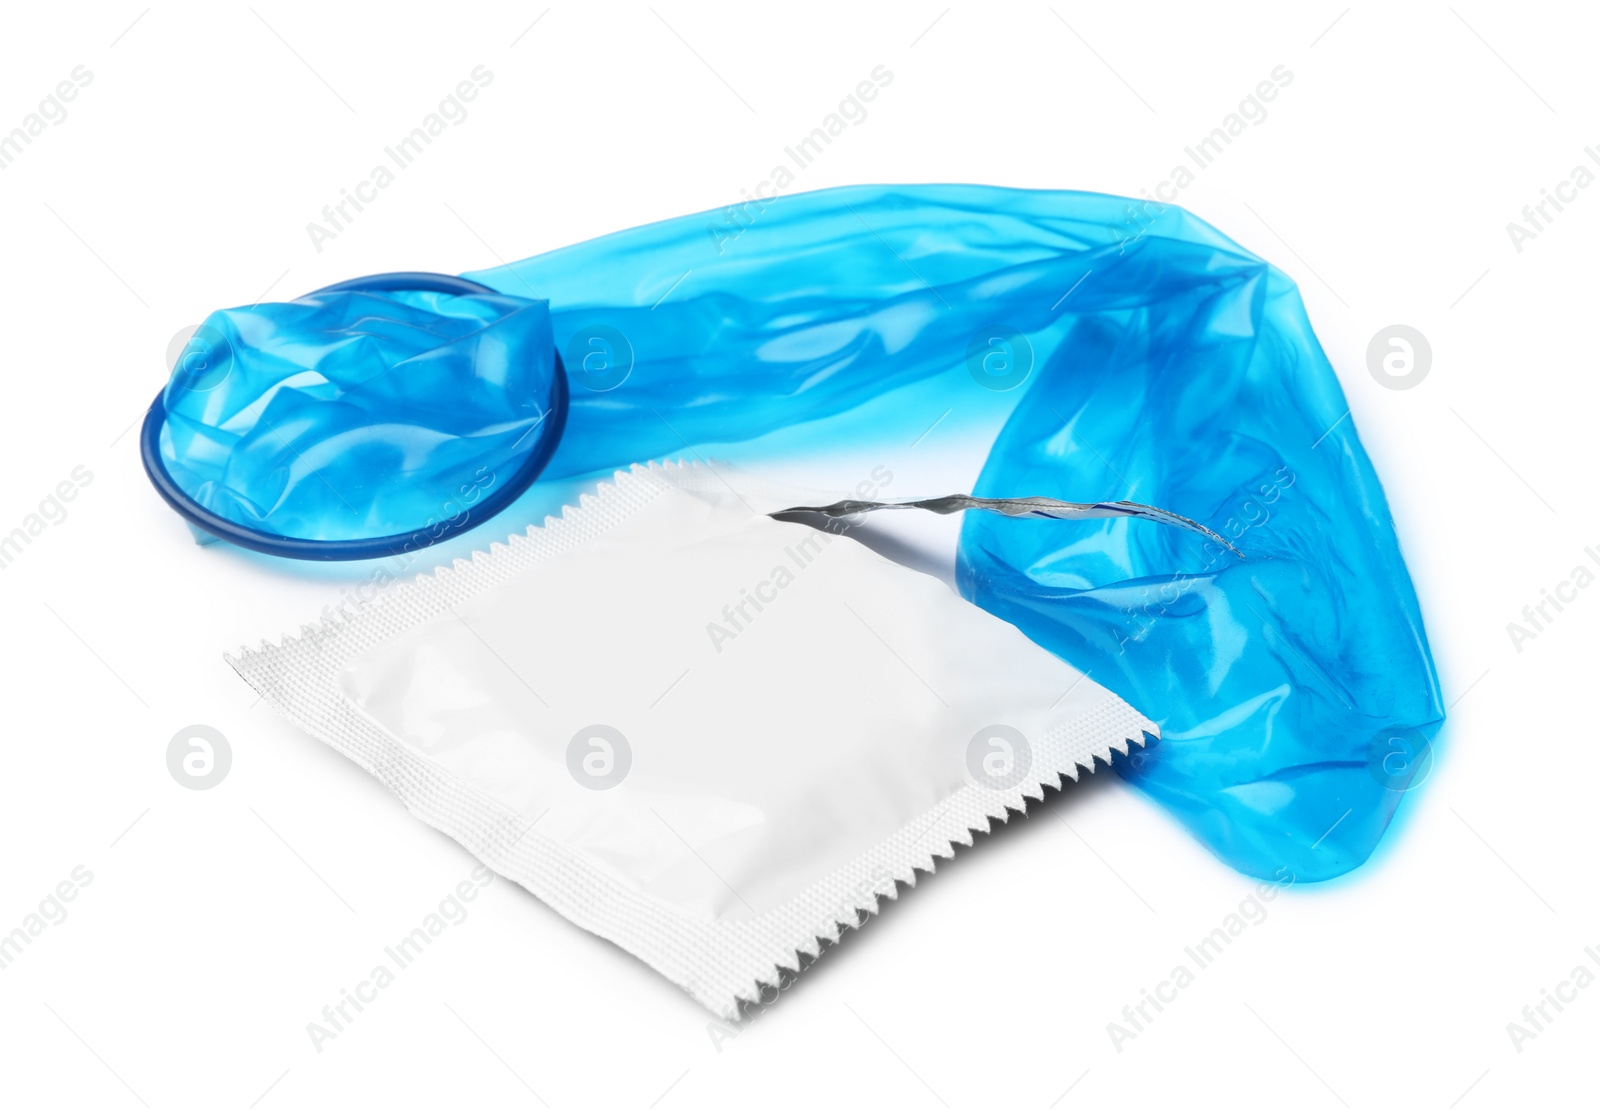 Image of Unrolled blue condom and package on white background. Safe sex